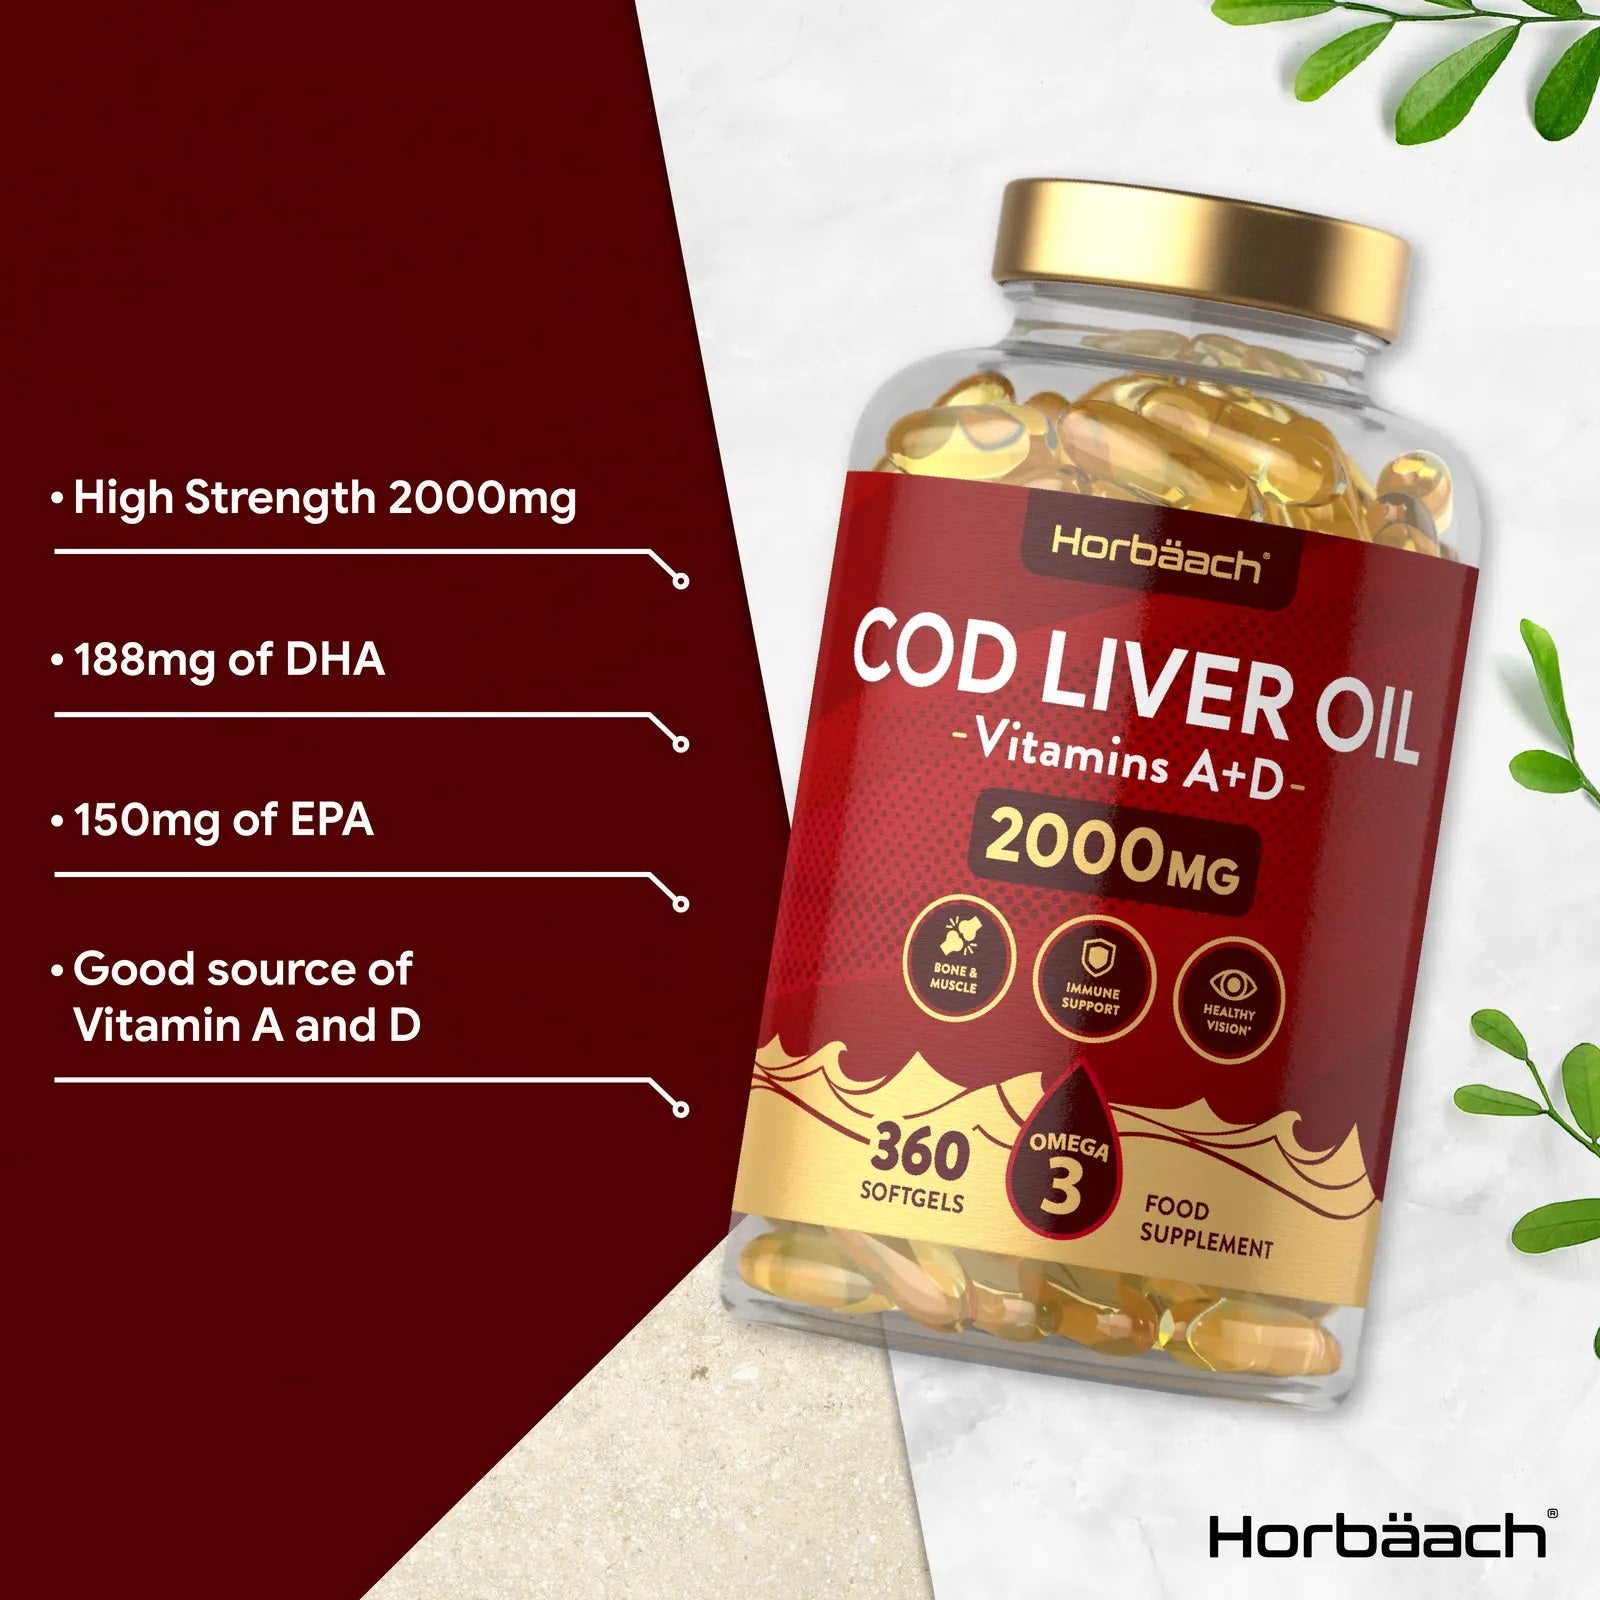 Cod Liver Oil 2000 mg with Vitamin A & D | 360 Softgels